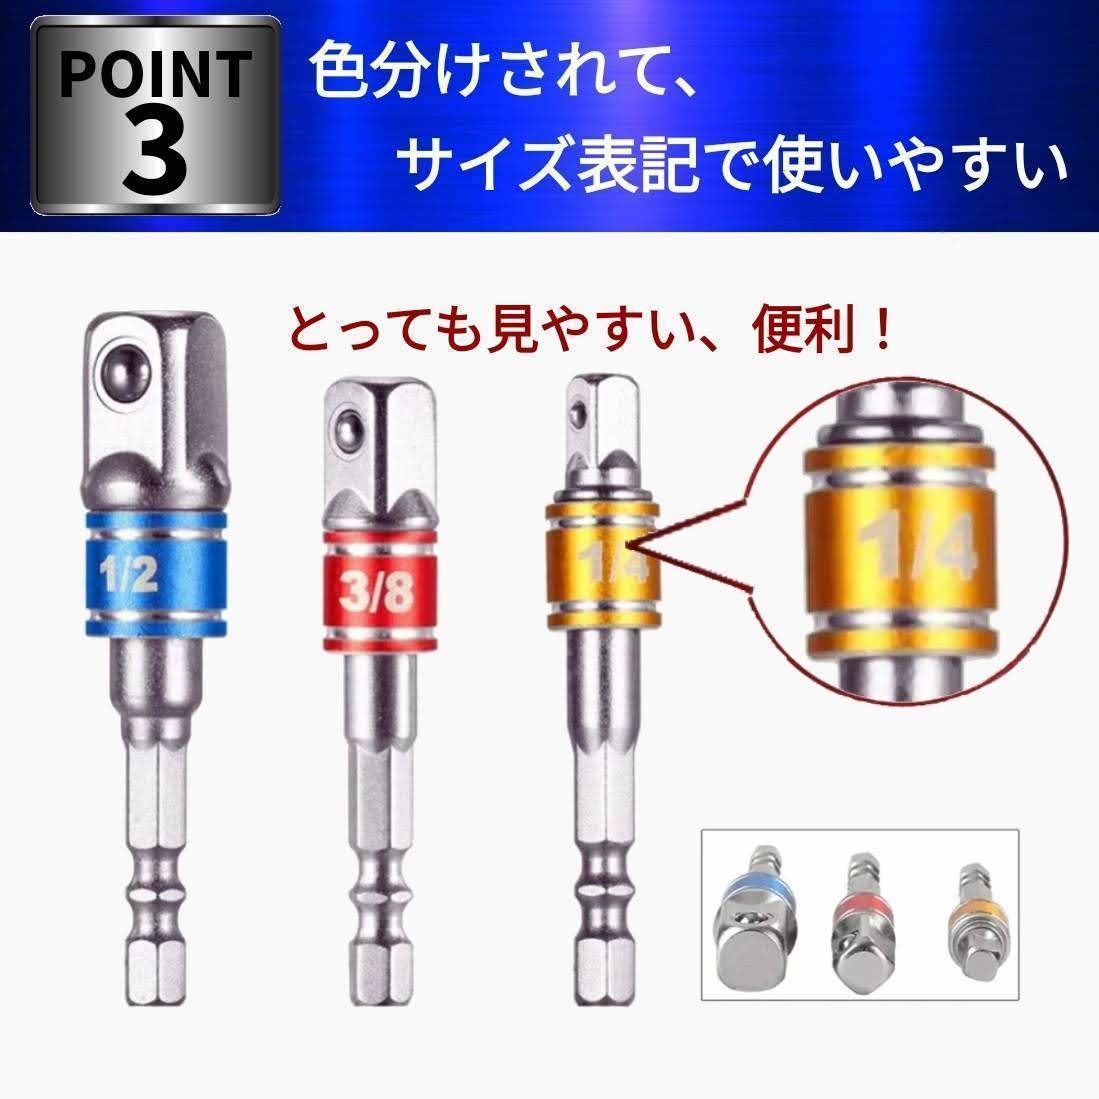  socket adaptor 7 point L type angle adaptor impact driver hexagon axis tool electric conversion drill extension bit diy Attachment 